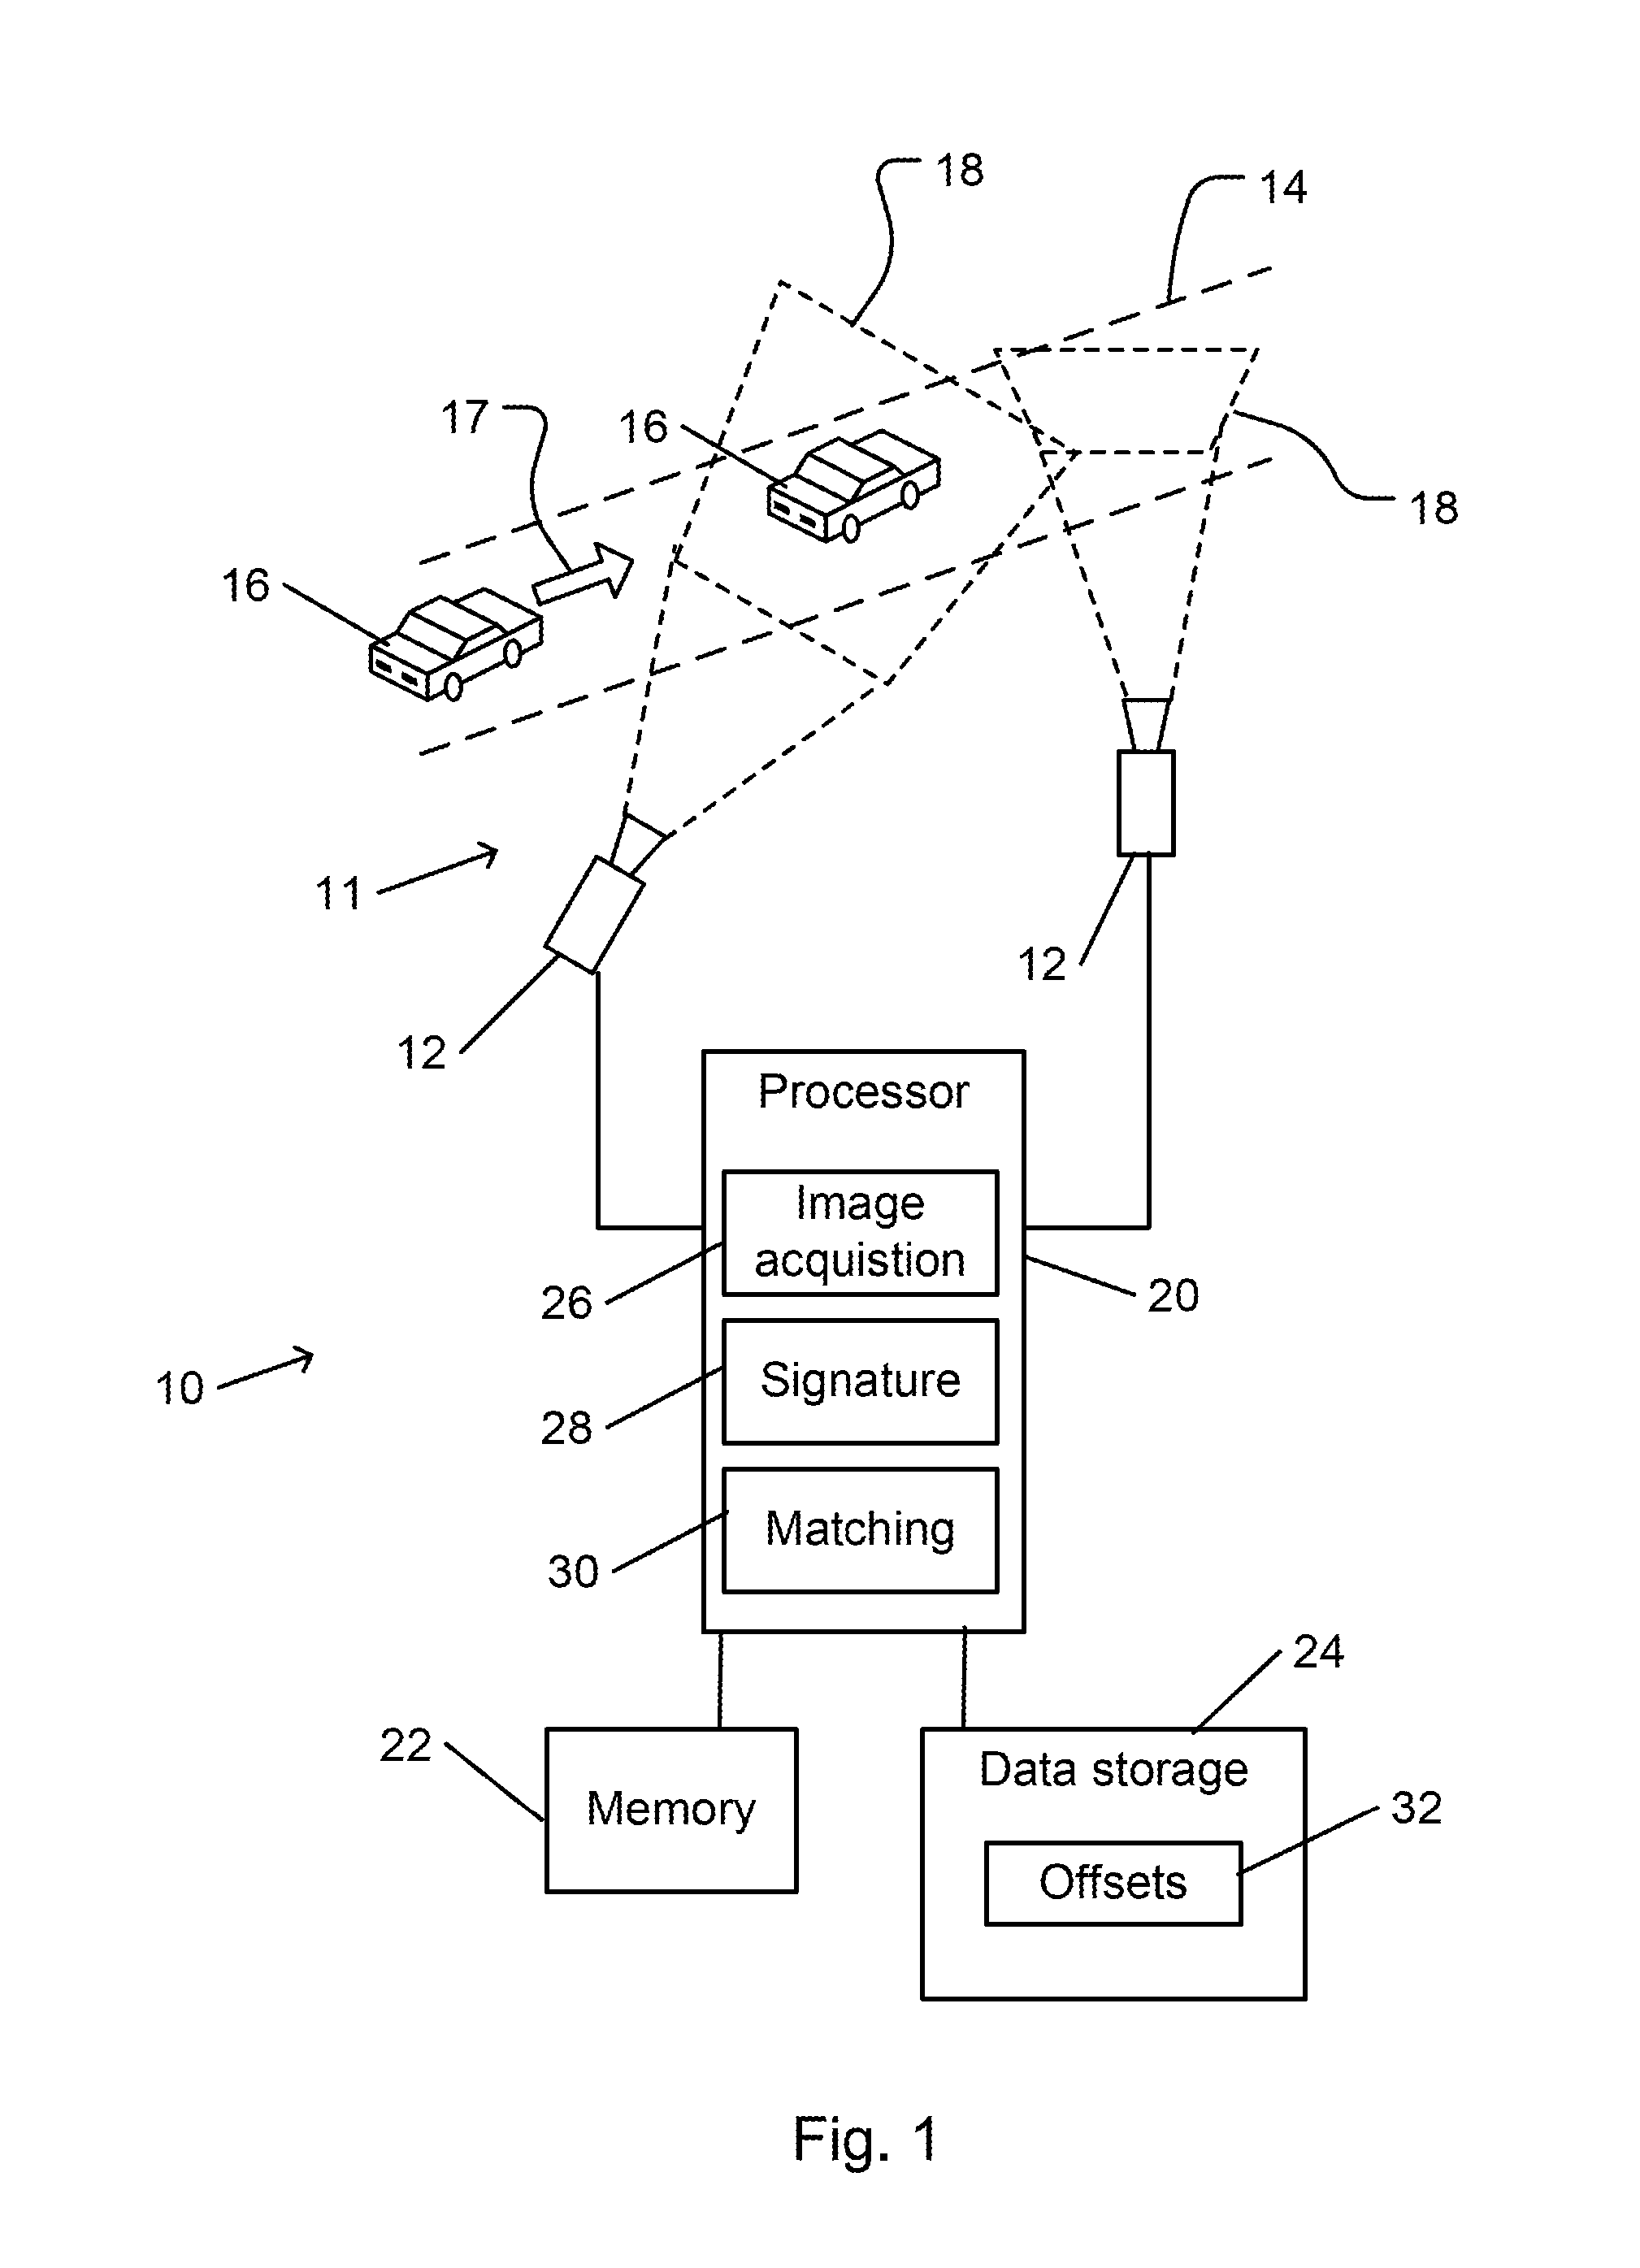 Automatic time signature-based video matching for a camera network